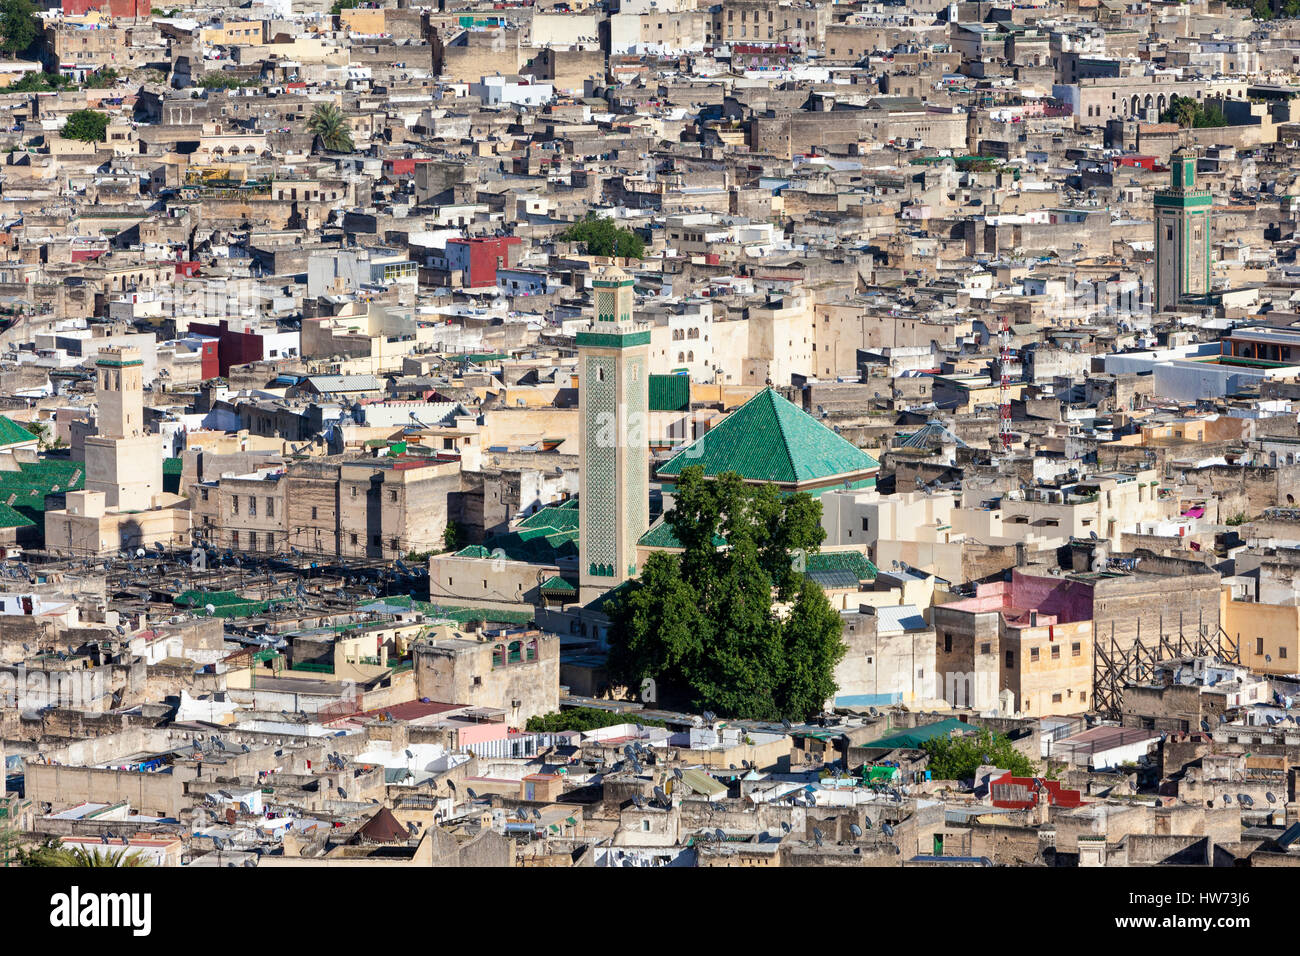 Fes, Morocco.  Old City (Fes El-Bali), Zawiya of Moulay Idris (center, with tiled minaret). Stock Photo